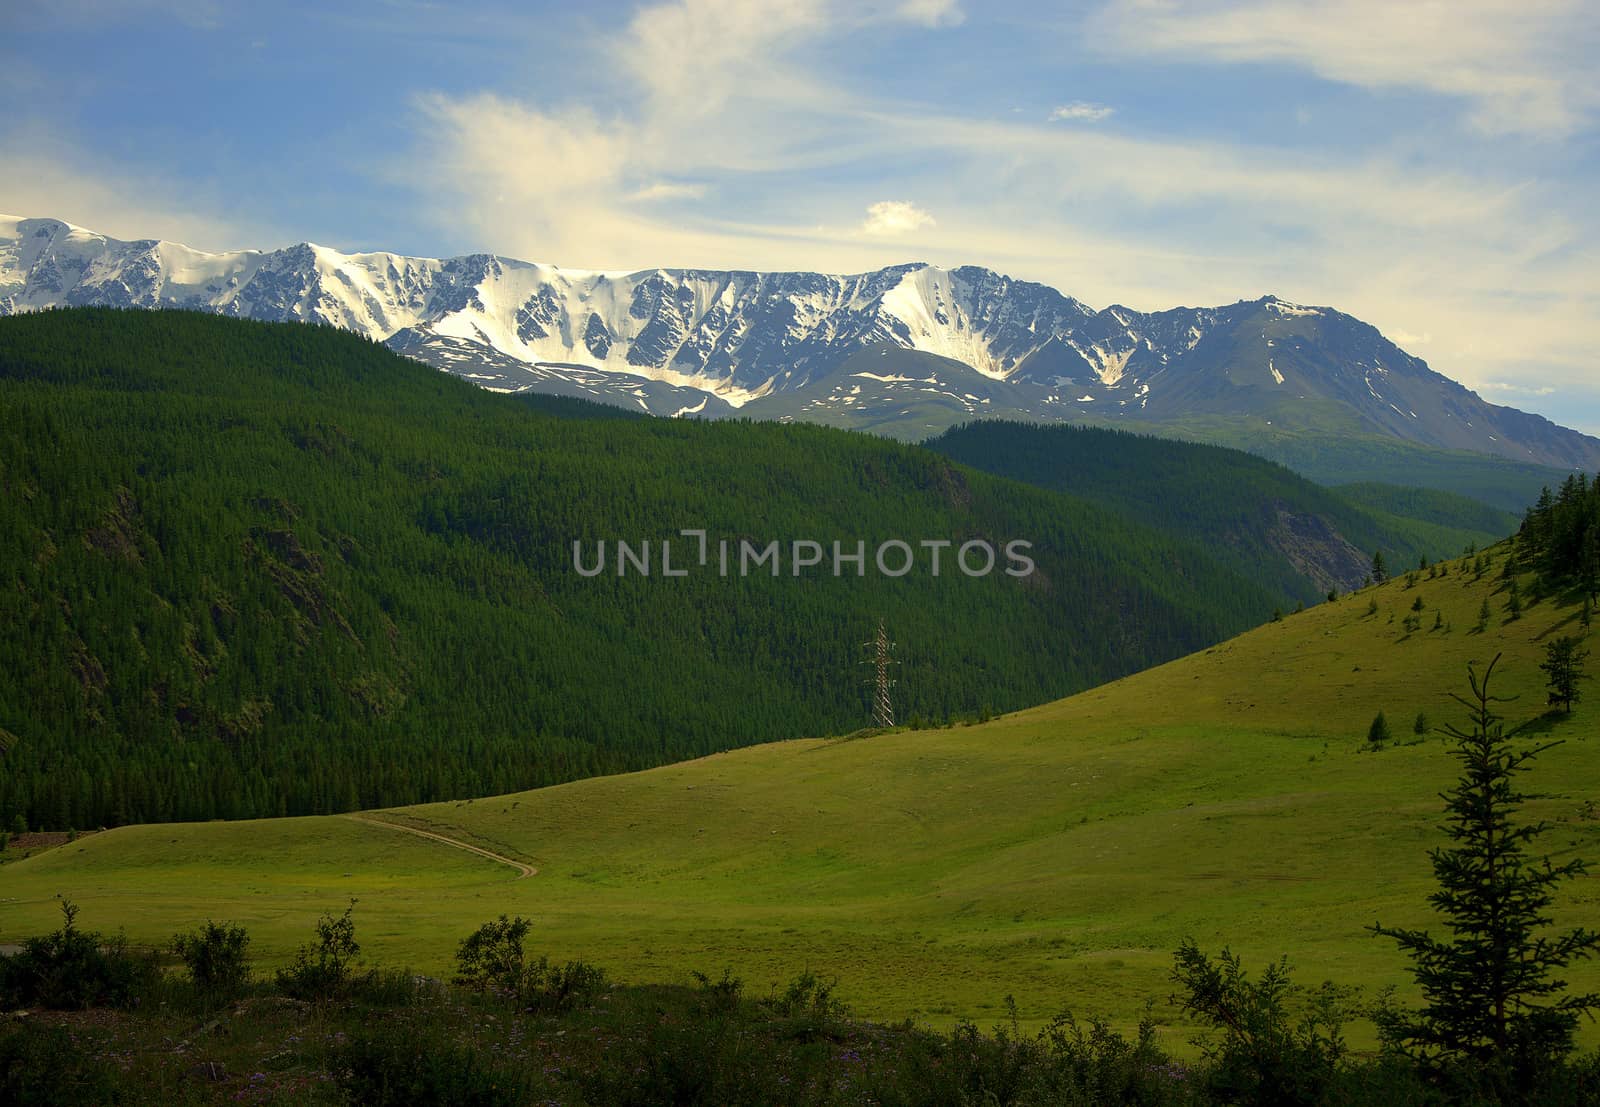 A fertile pasture in a valley near the slopes of a green hill and snow caps of mountain peaks in the background. North Kurai Range, Altai, Siberia, Russia.